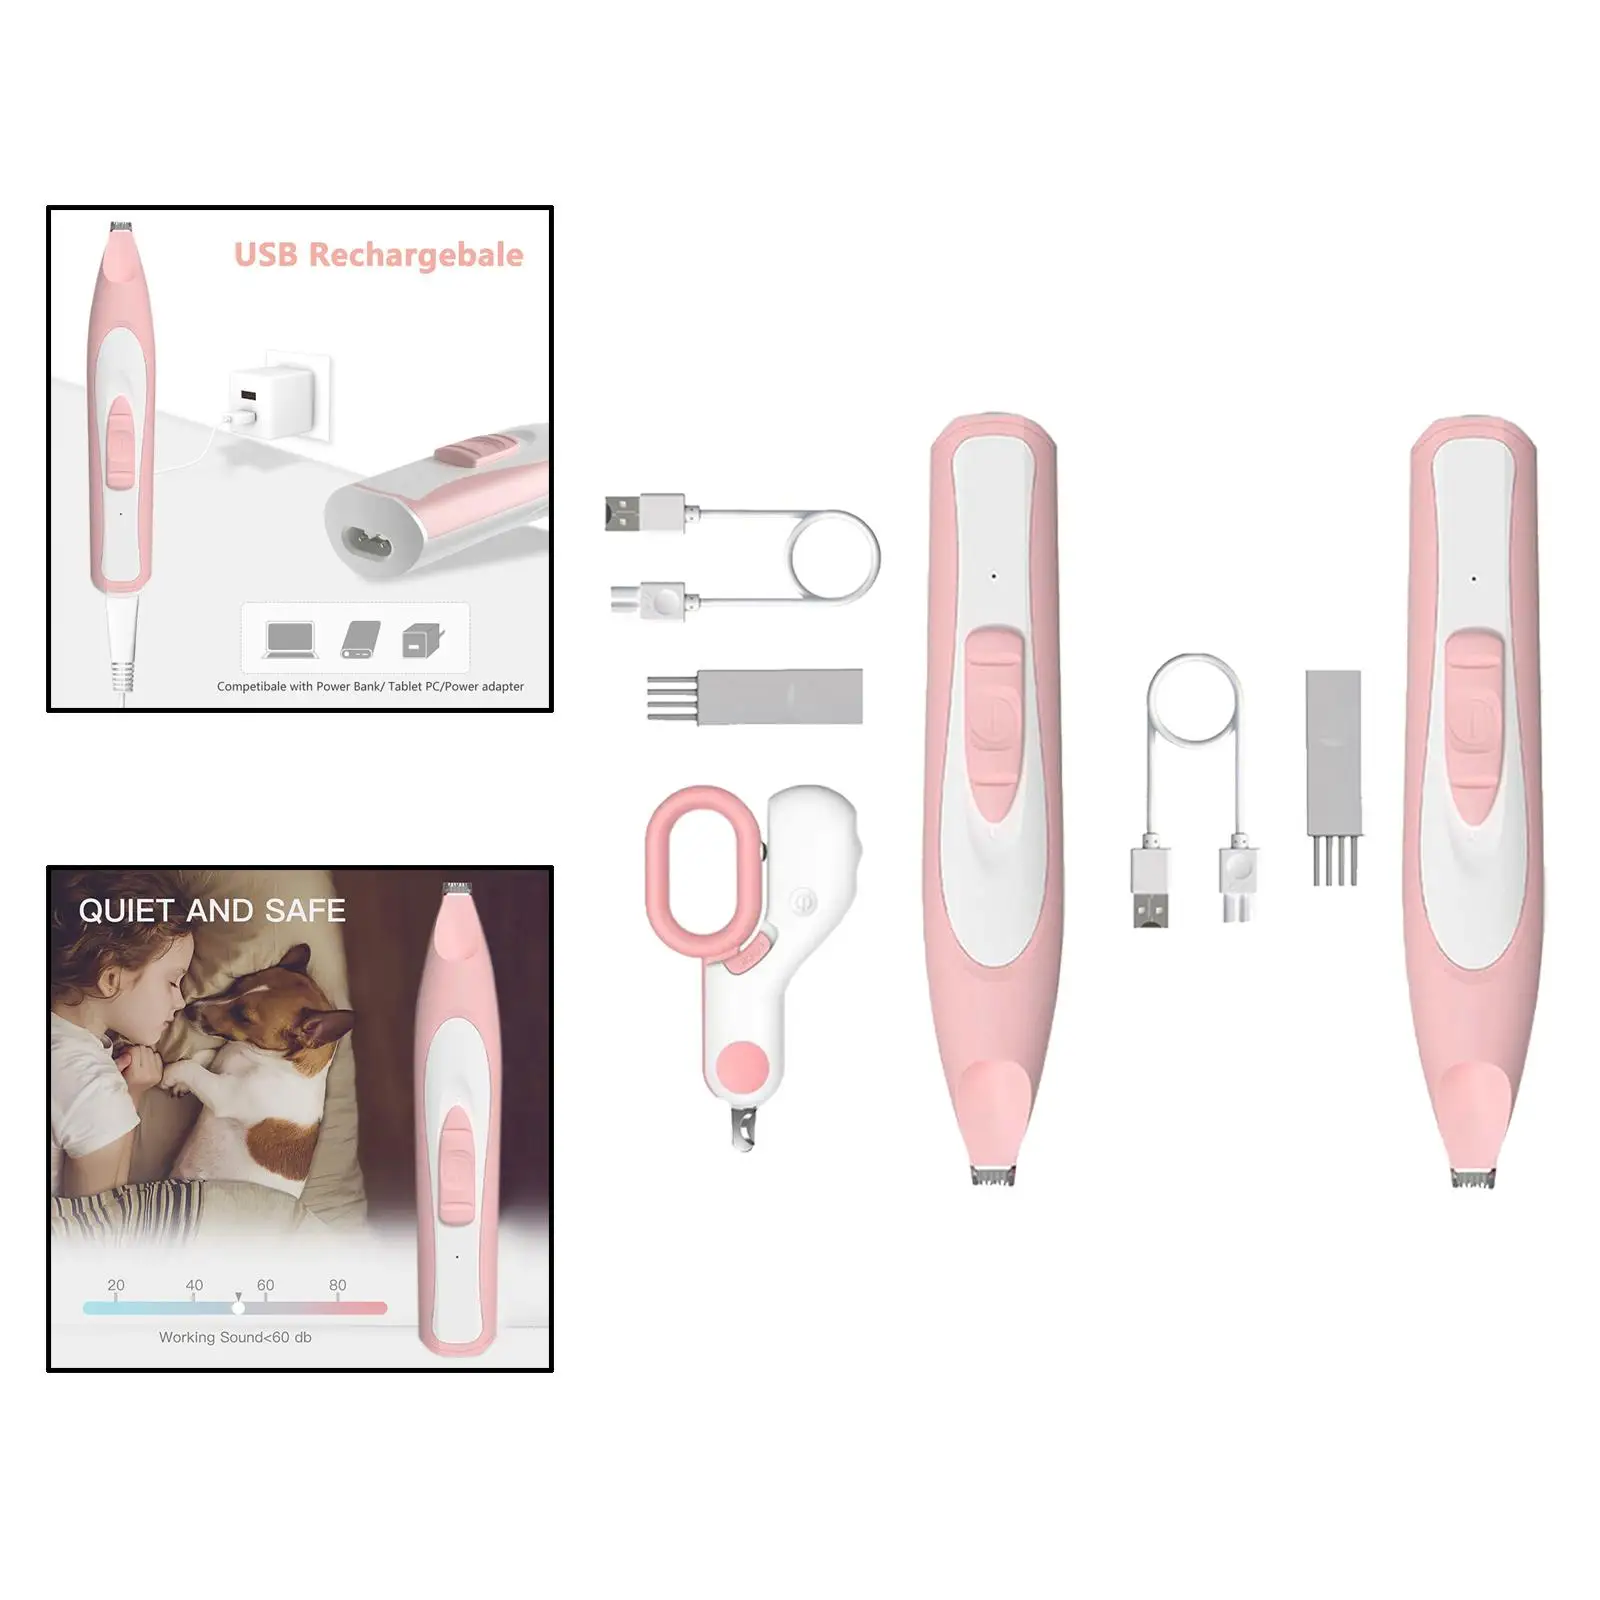 Dog Grooming Clippers, Cordless Small Pet Hair Trimmer, Low Noise for Trimming Dogs Hair Paws, Eyes, Ears, Face, Rump